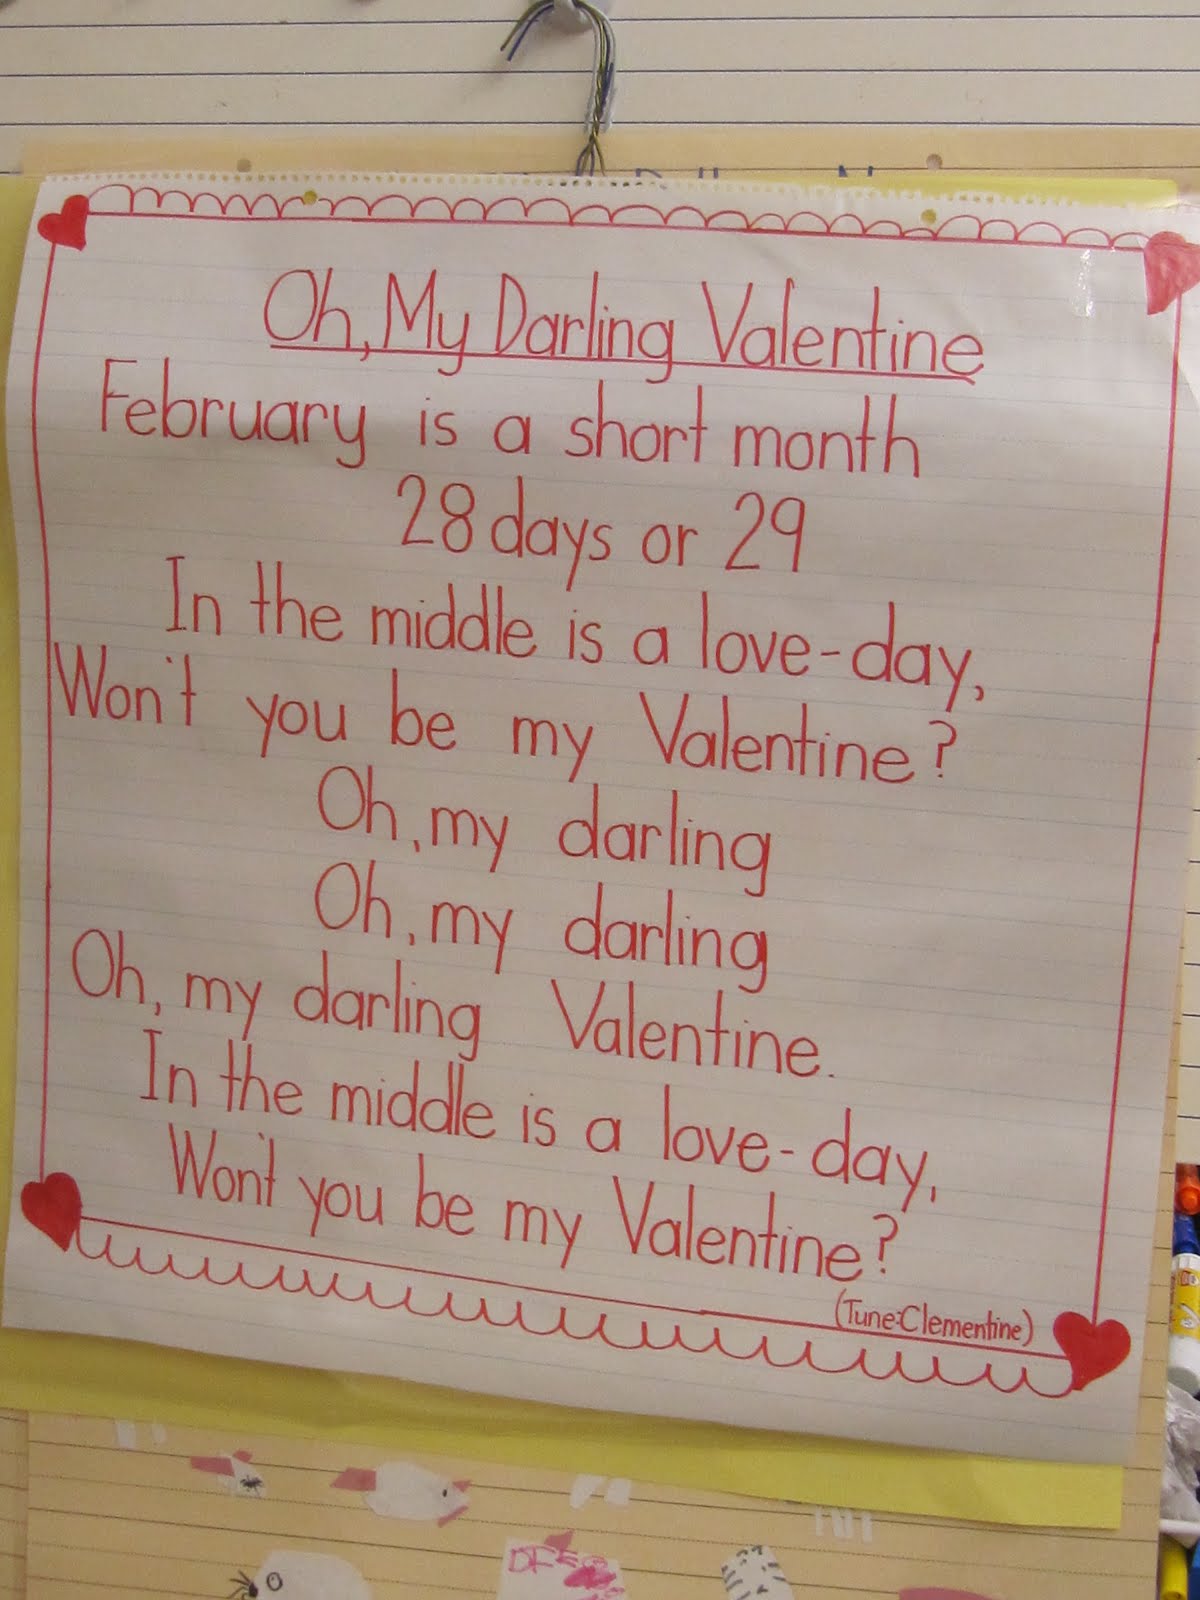 Joyful Learning In KC: Valentines Poems and Songs1200 x 1600